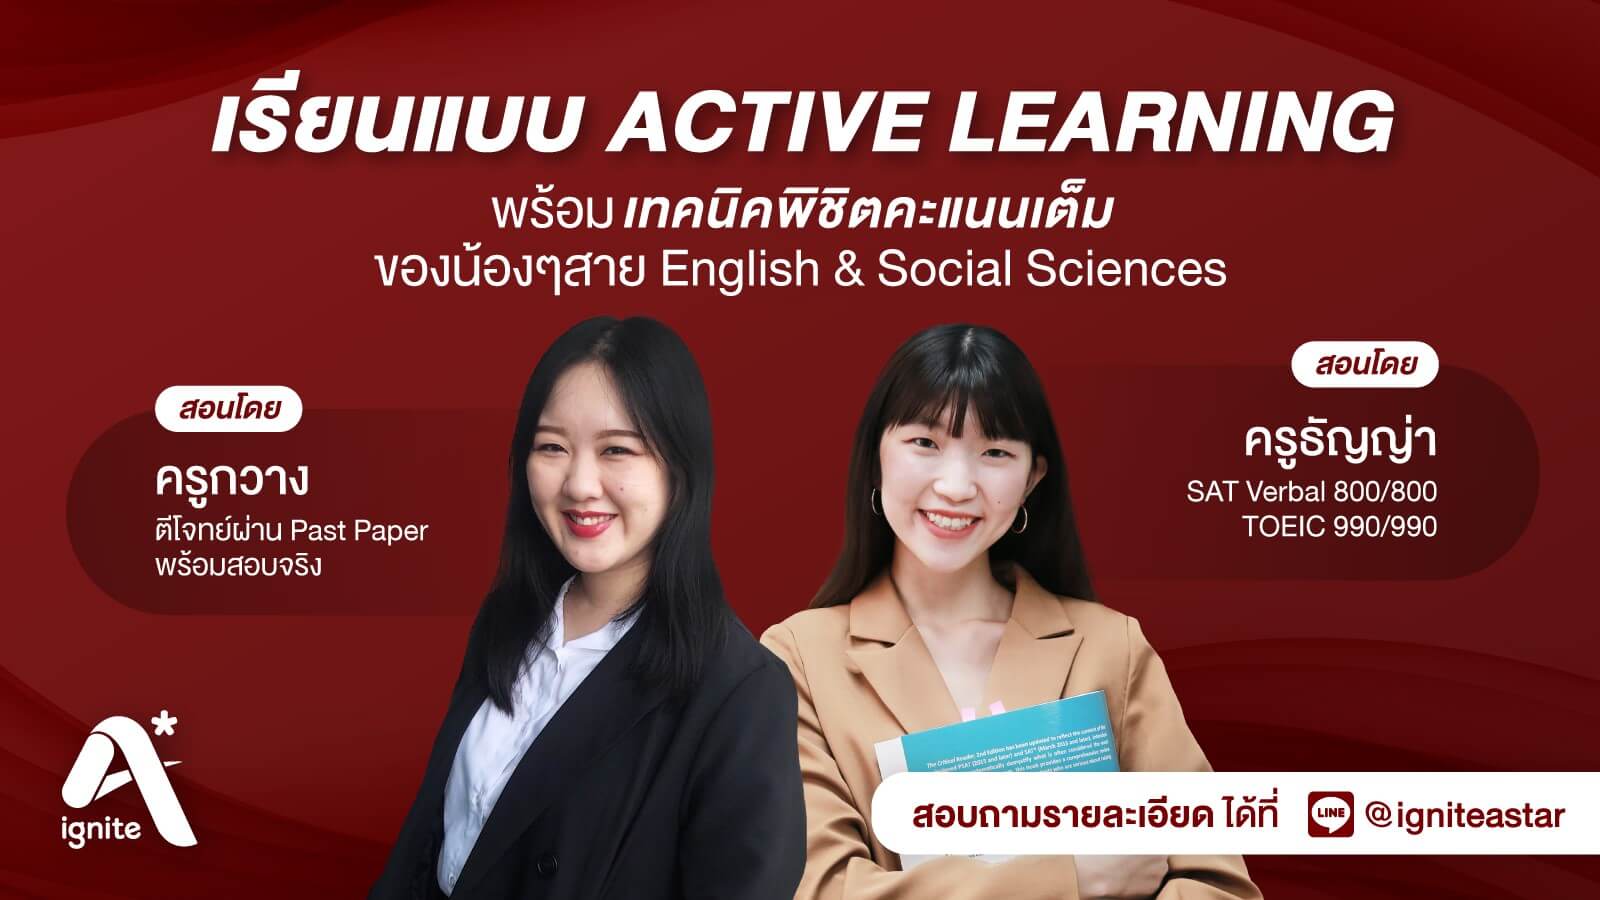 teacher kwang and tanya from ignite a star are ready to teach you with english and social sciences for active learning